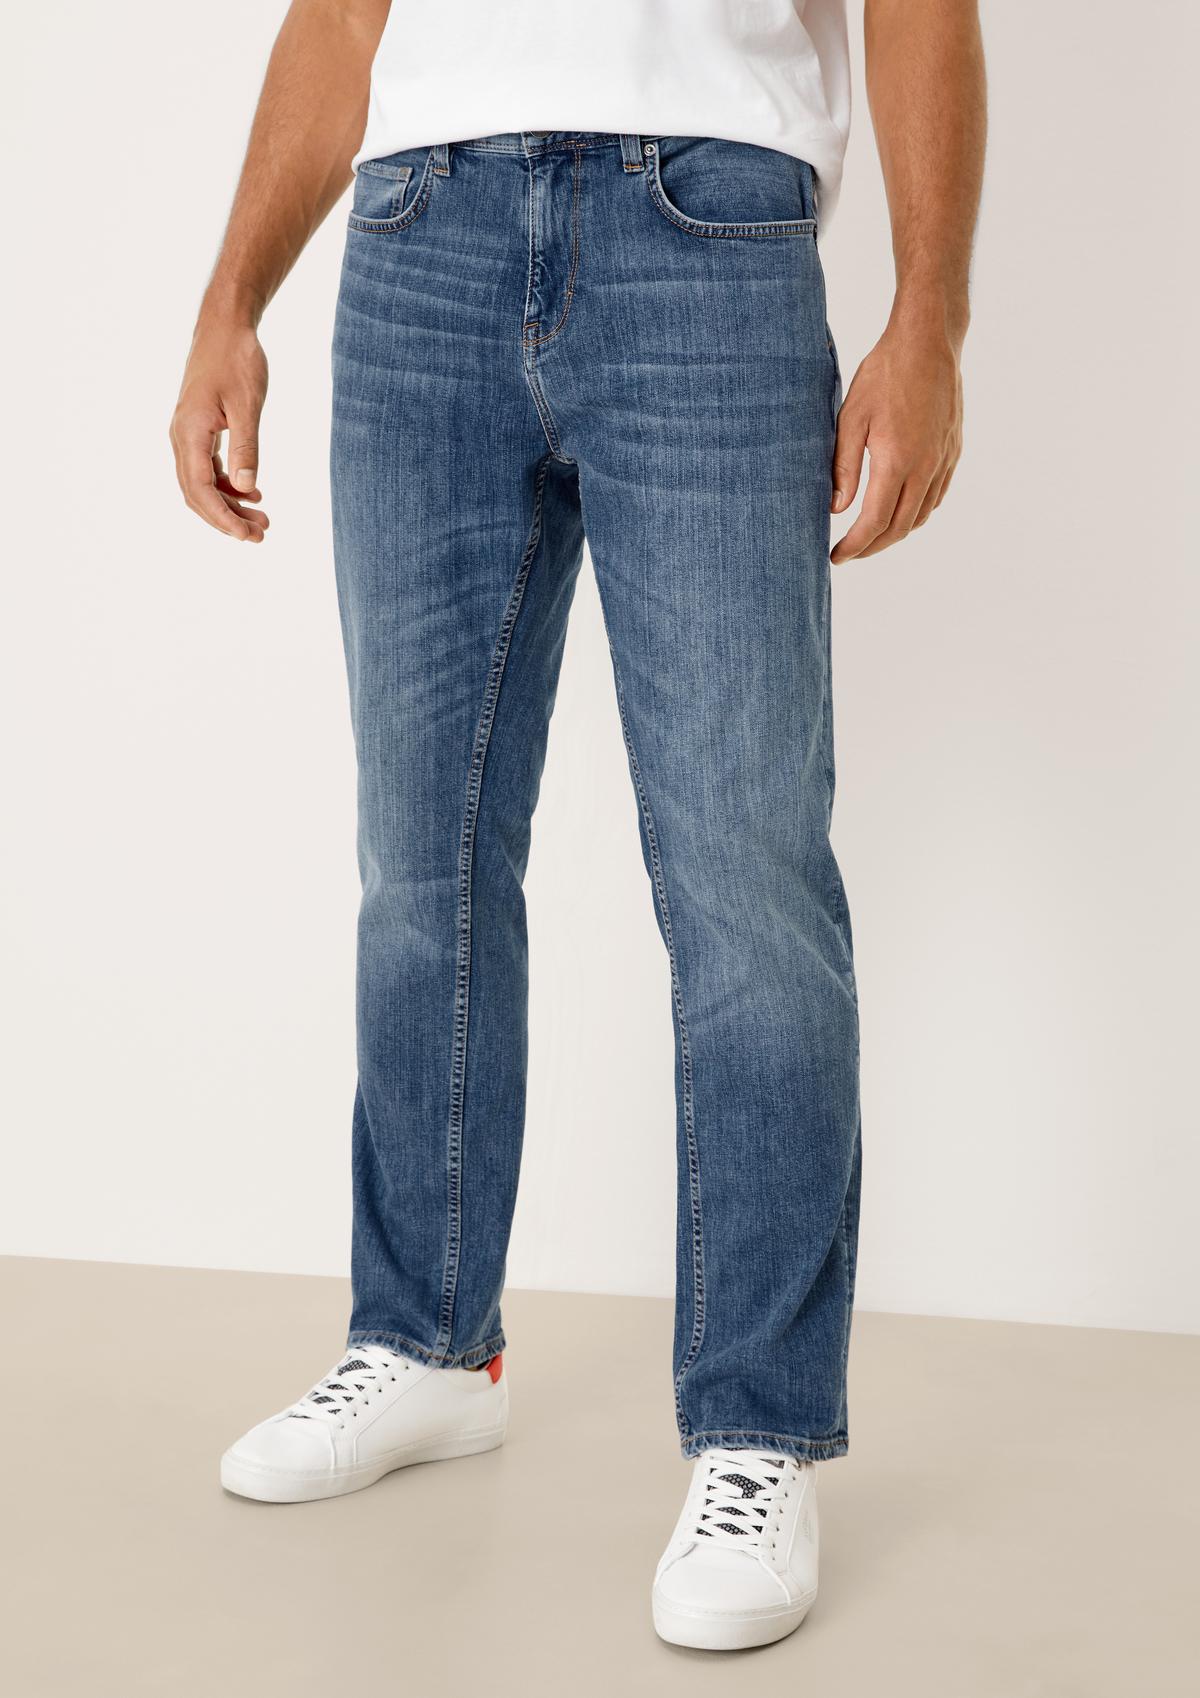 Relaxed: jeans in a five-pocket design